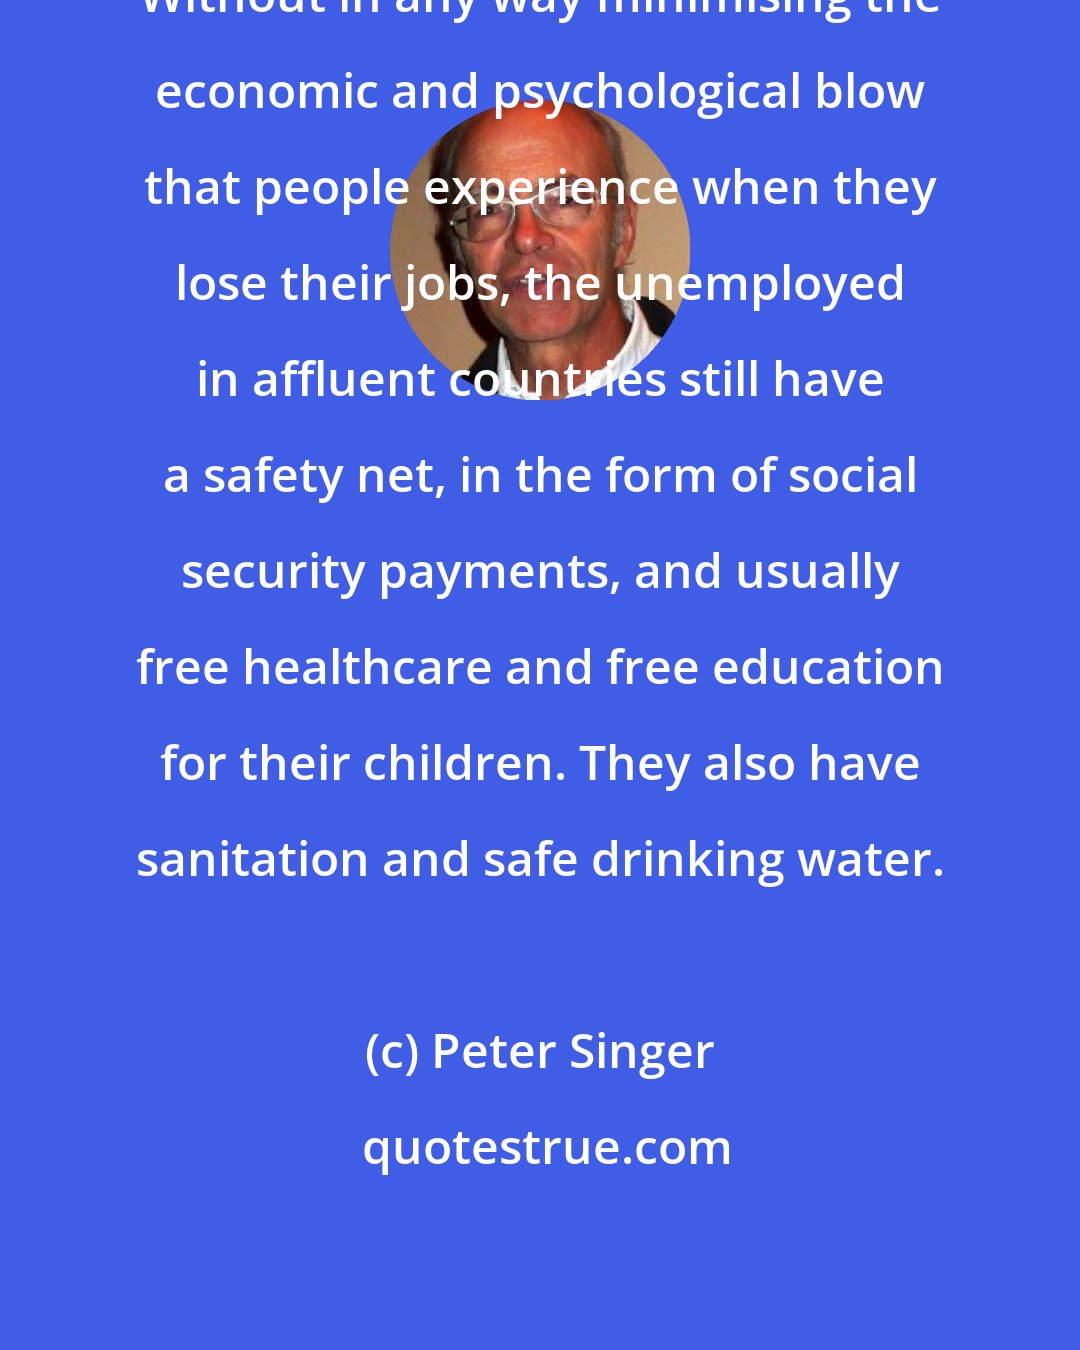 Peter Singer: Without in any way minimising the economic and psychological blow that people experience when they lose their jobs, the unemployed in affluent countries still have a safety net, in the form of social security payments, and usually free healthcare and free education for their children. They also have sanitation and safe drinking water.